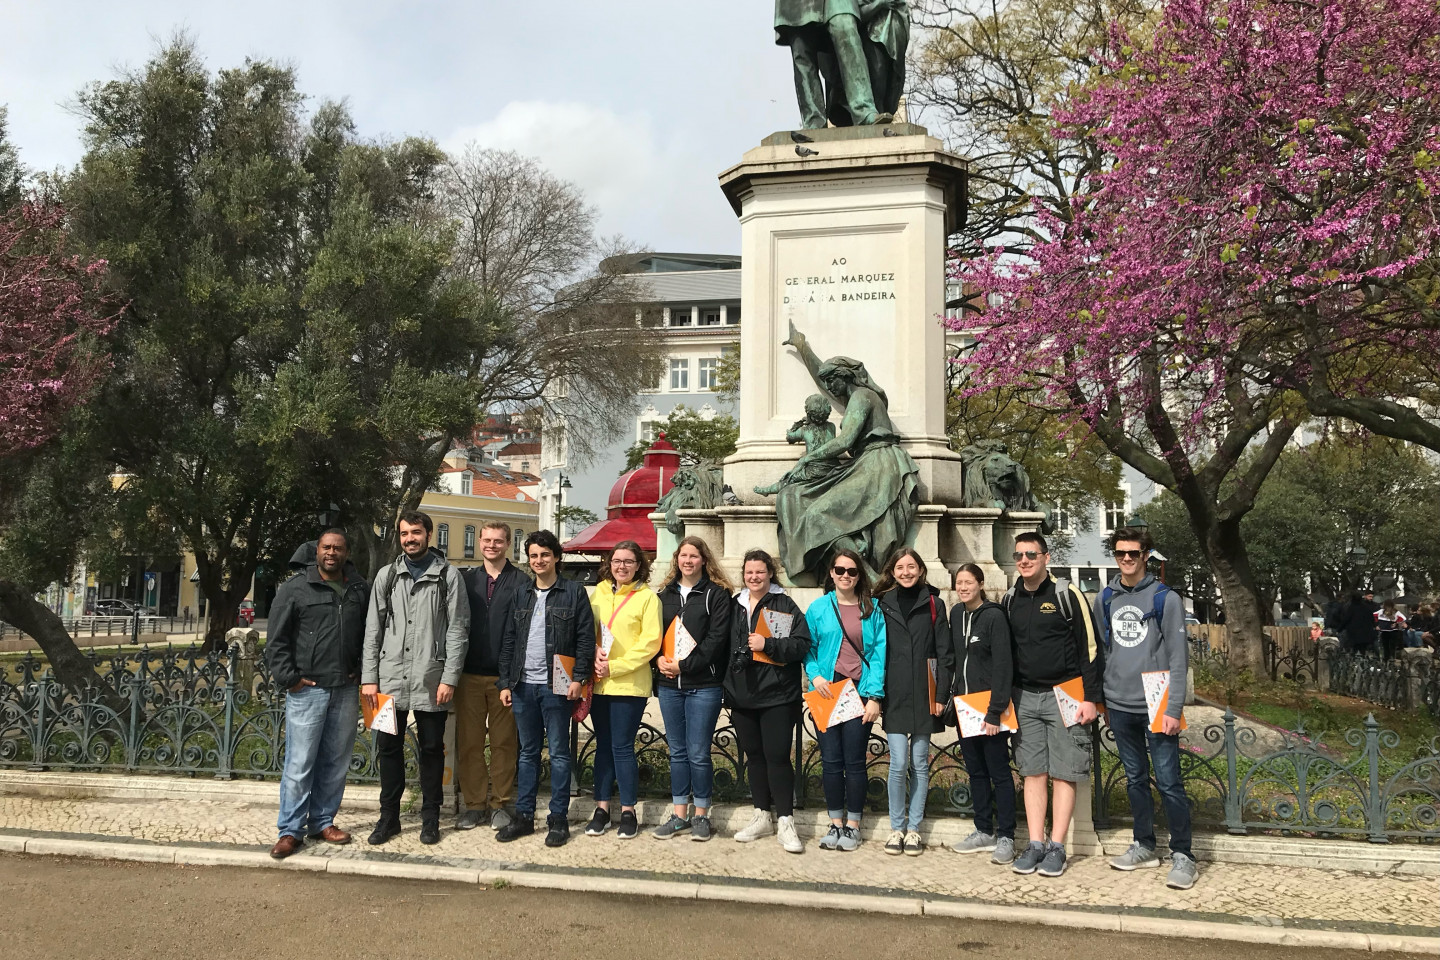 A group of students stands in front of a statue in Portugal.